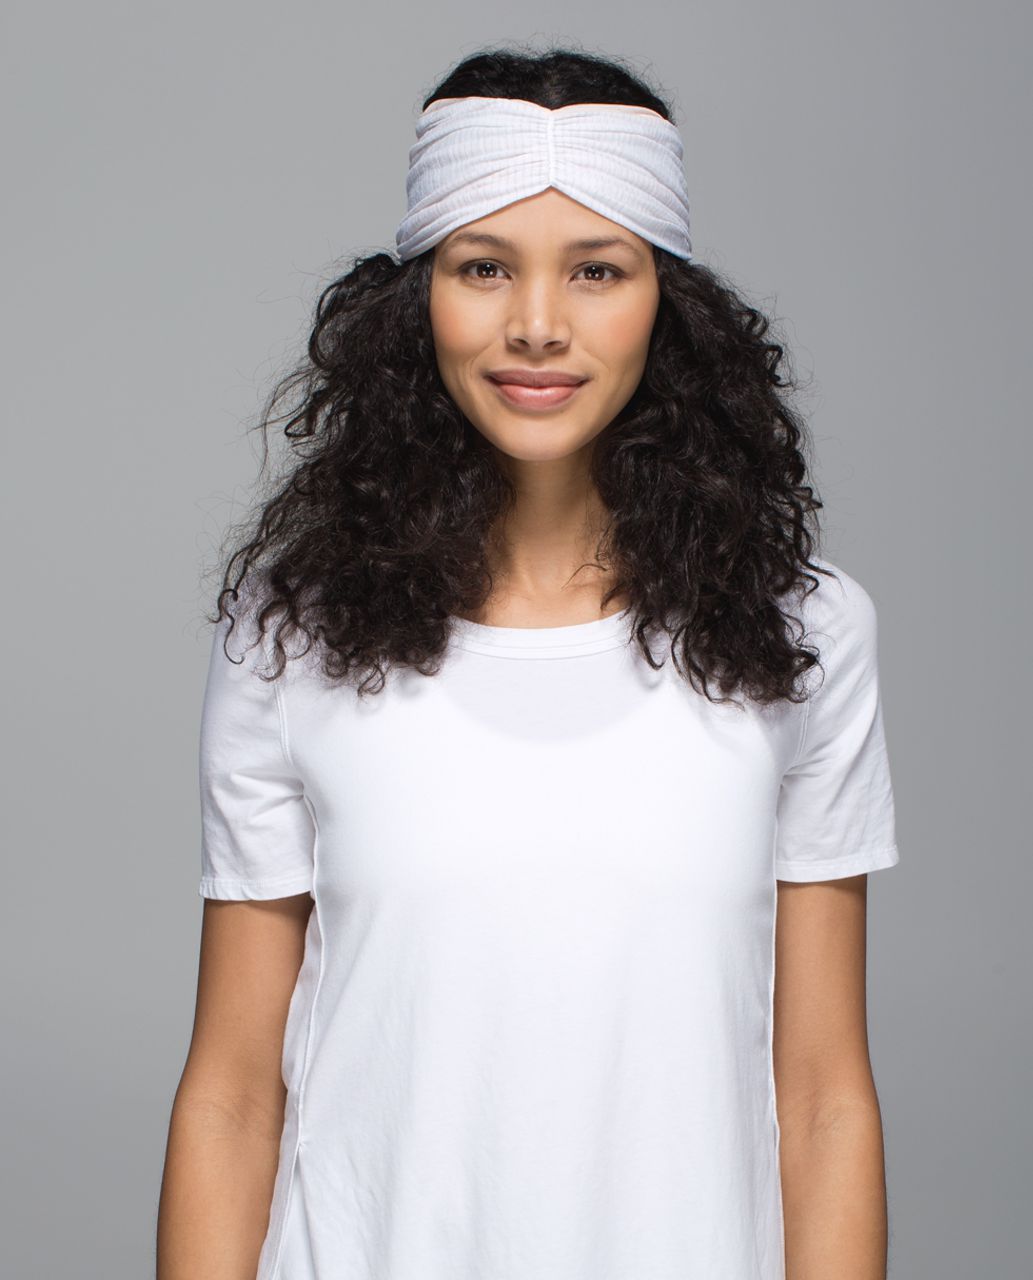 Lululemon Sweat To Sweet Headwrap - Butter Pink / Heathered White